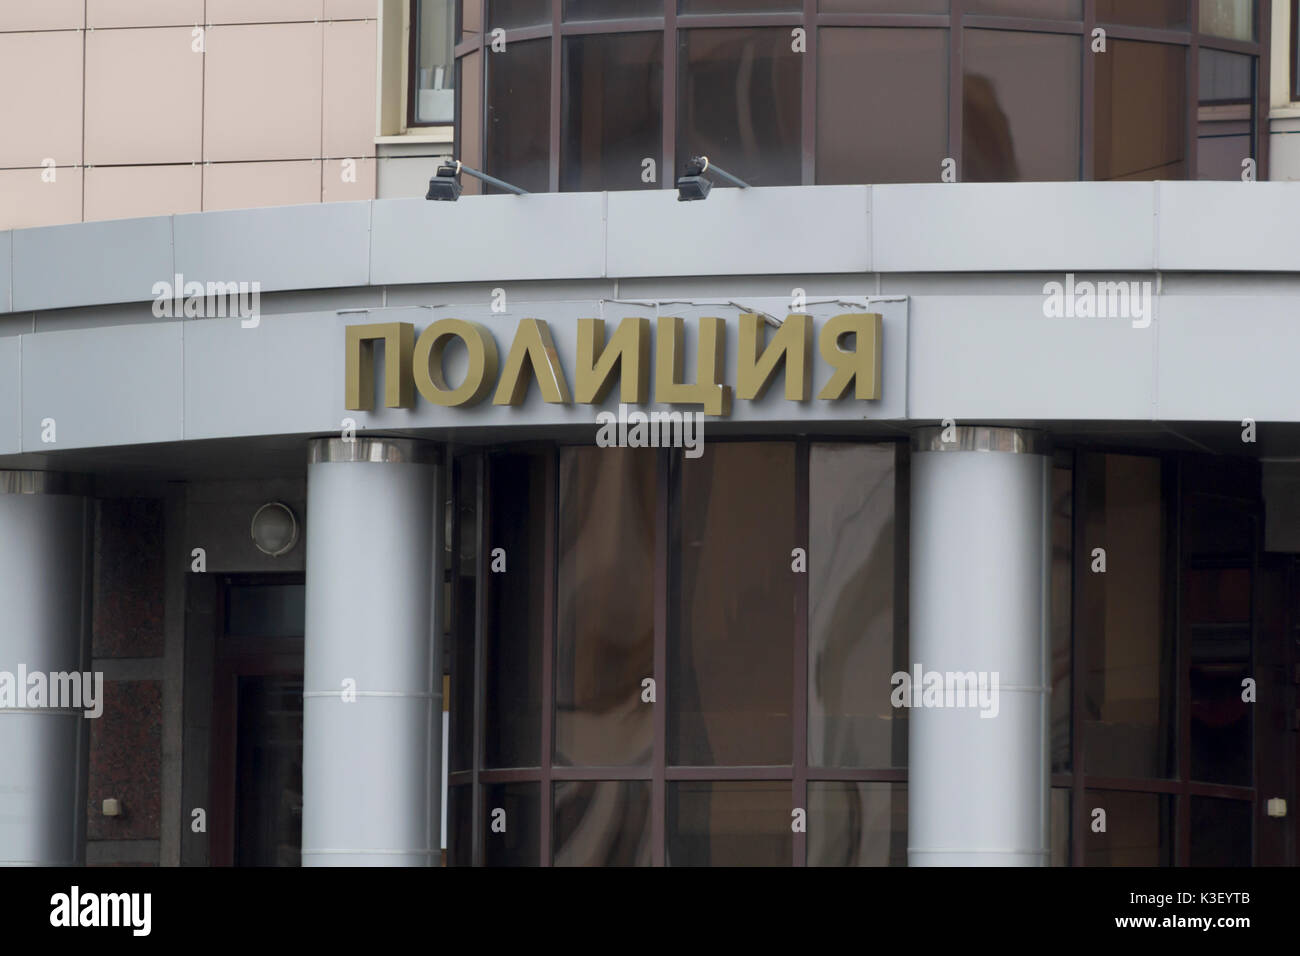 Sign on Russian building - Inscription Police above the entrance Stock Photo